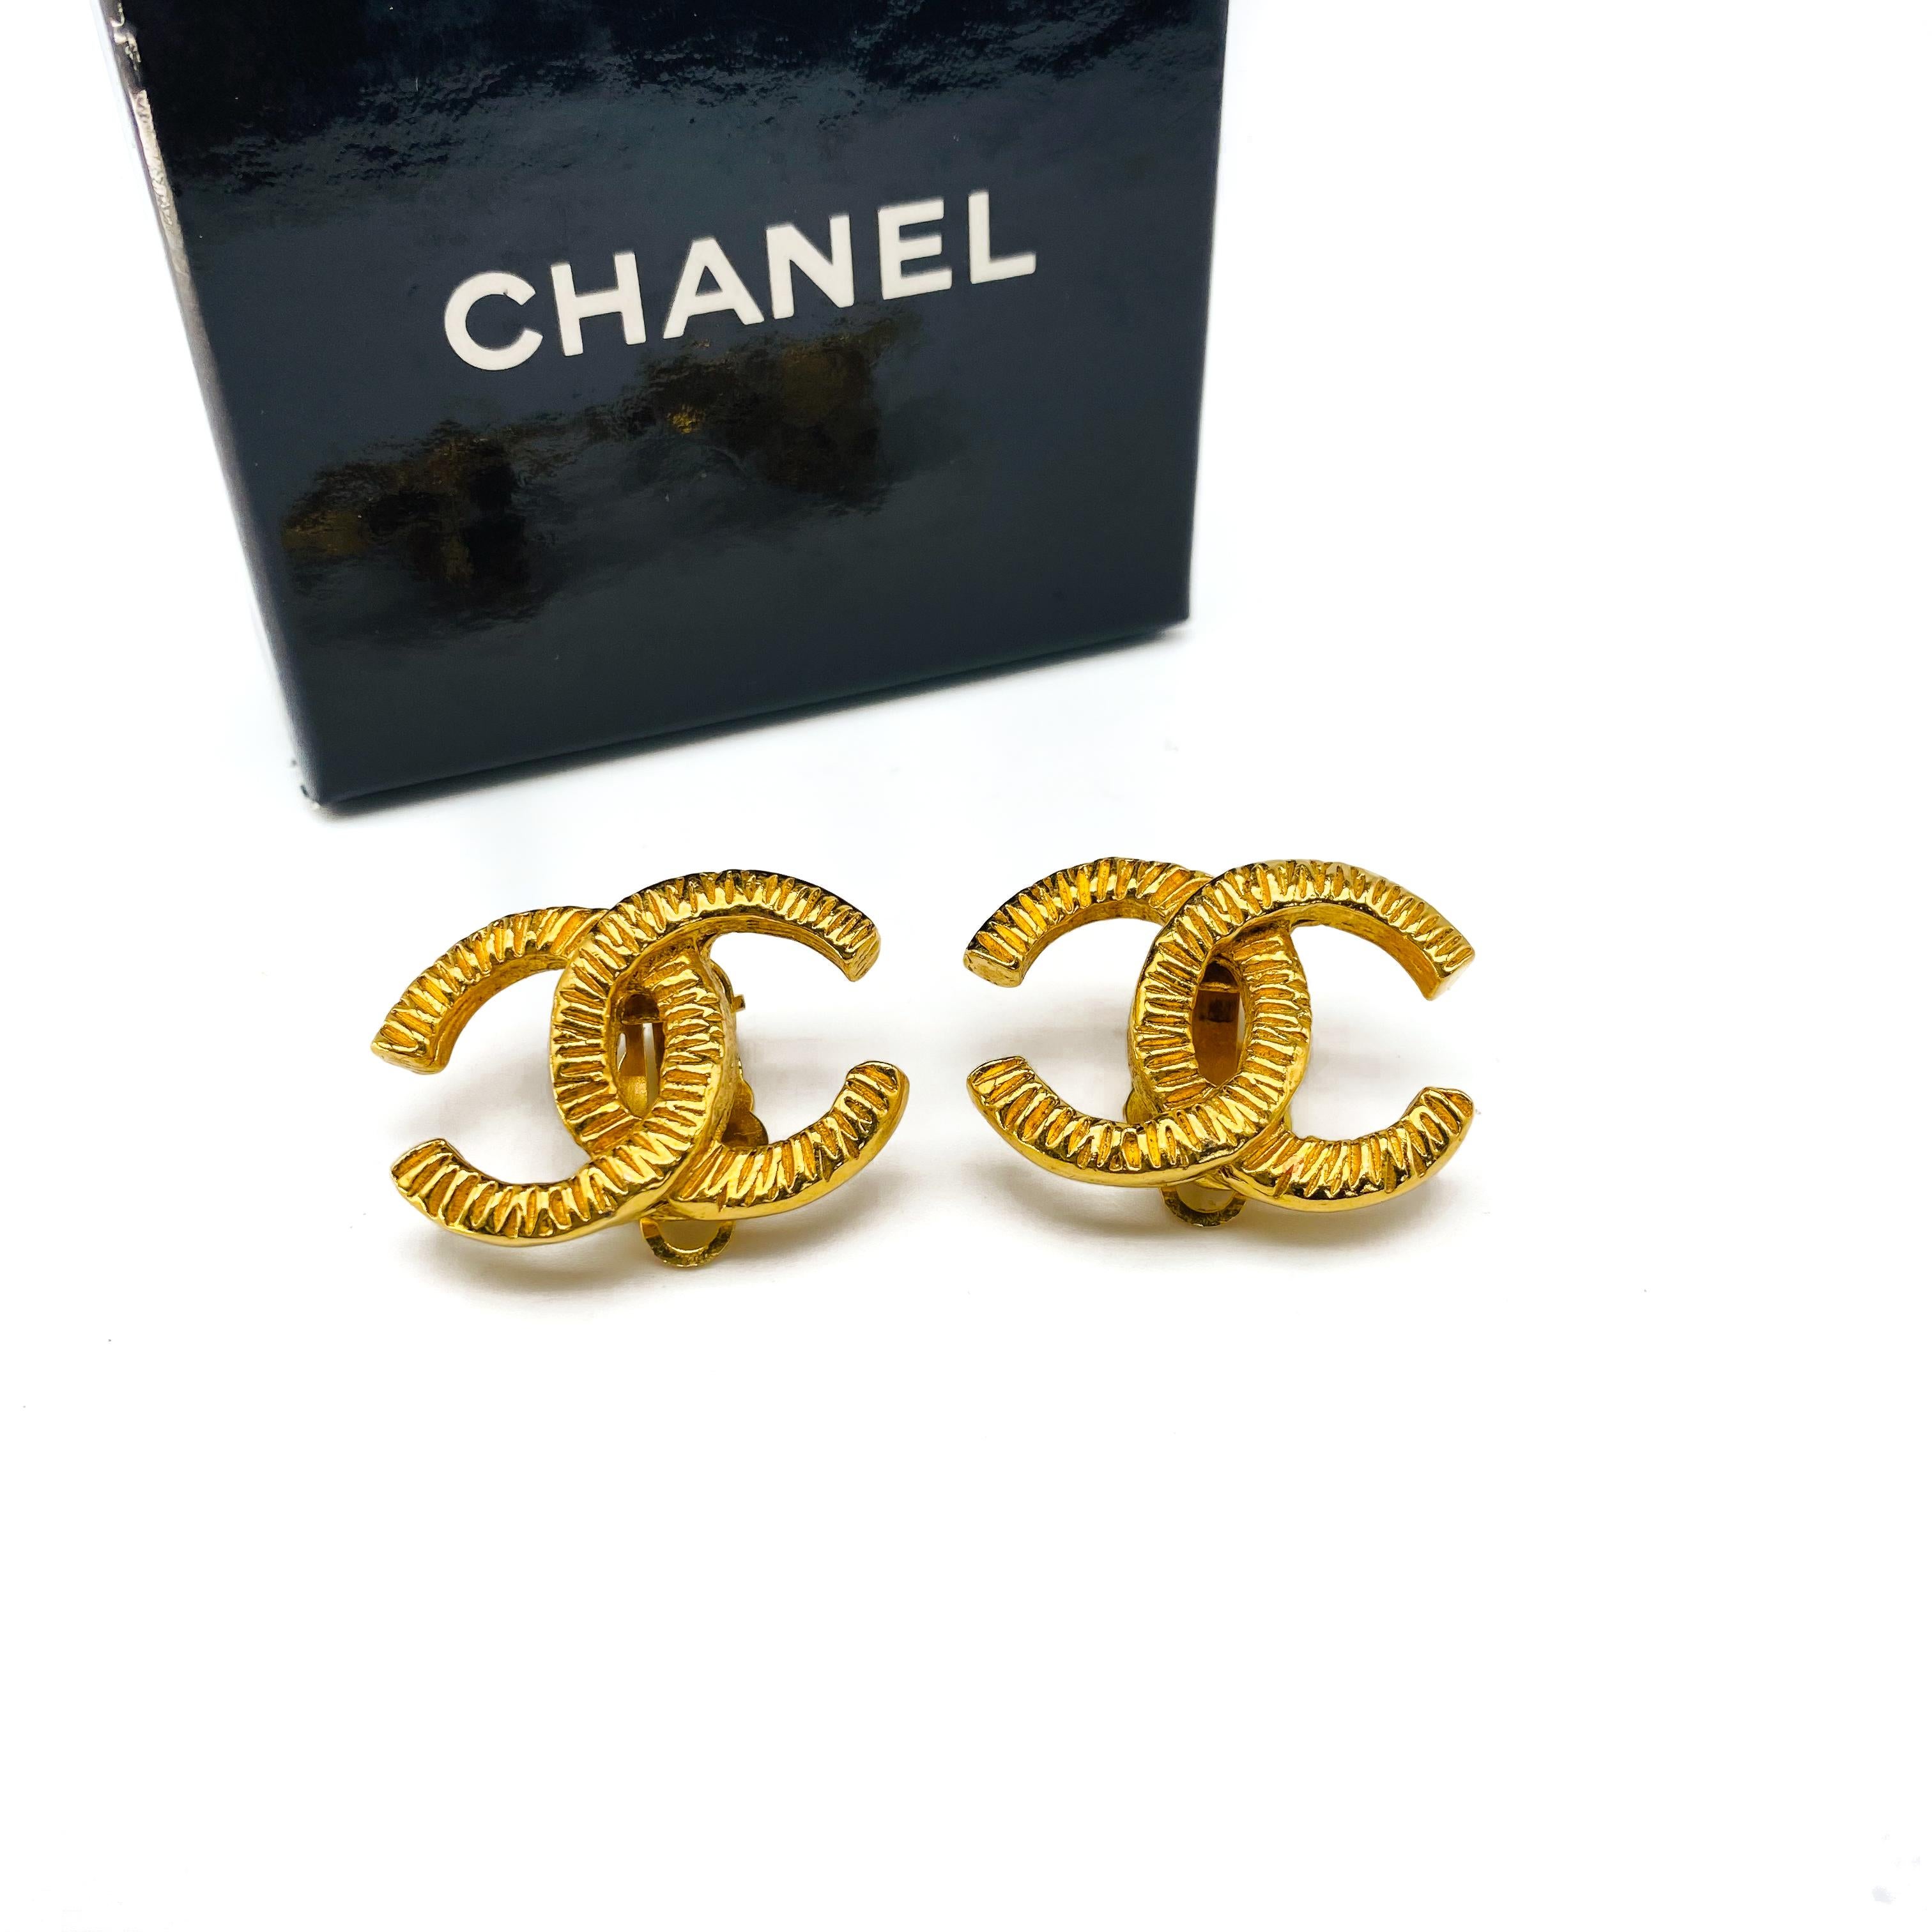 Chanel 1970s Vintage CC Clip On Earrings

Timeless and iconic statement earrings from the house of Chanel, still the most desirable fashion brand in the world. Made in France in the 1970s, these rare earrings are cast from beautifully textured gold